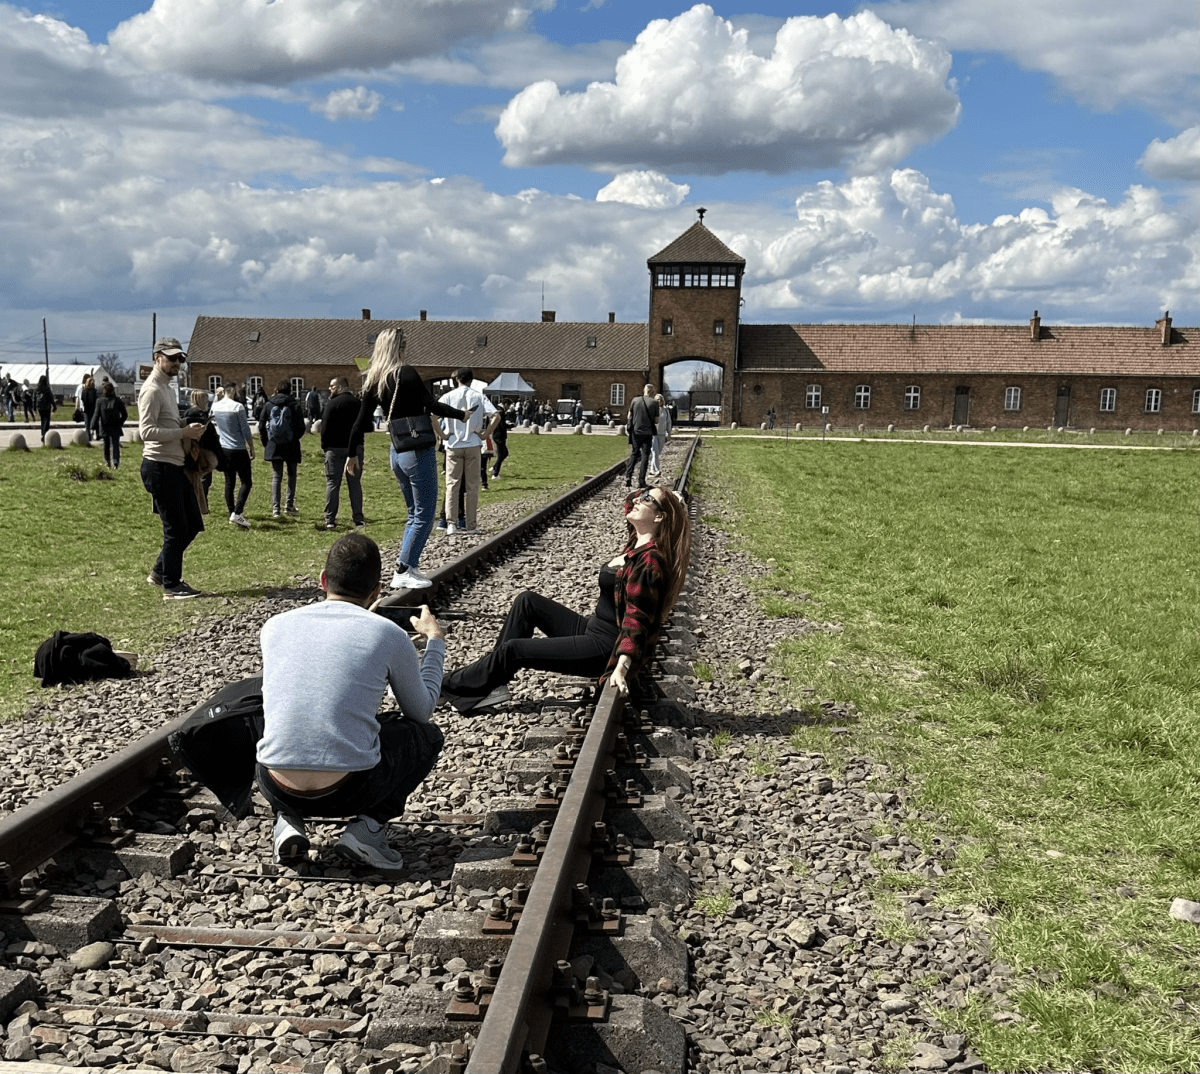 A woman poses for a photo on the train tracks in from of Auschwitz.